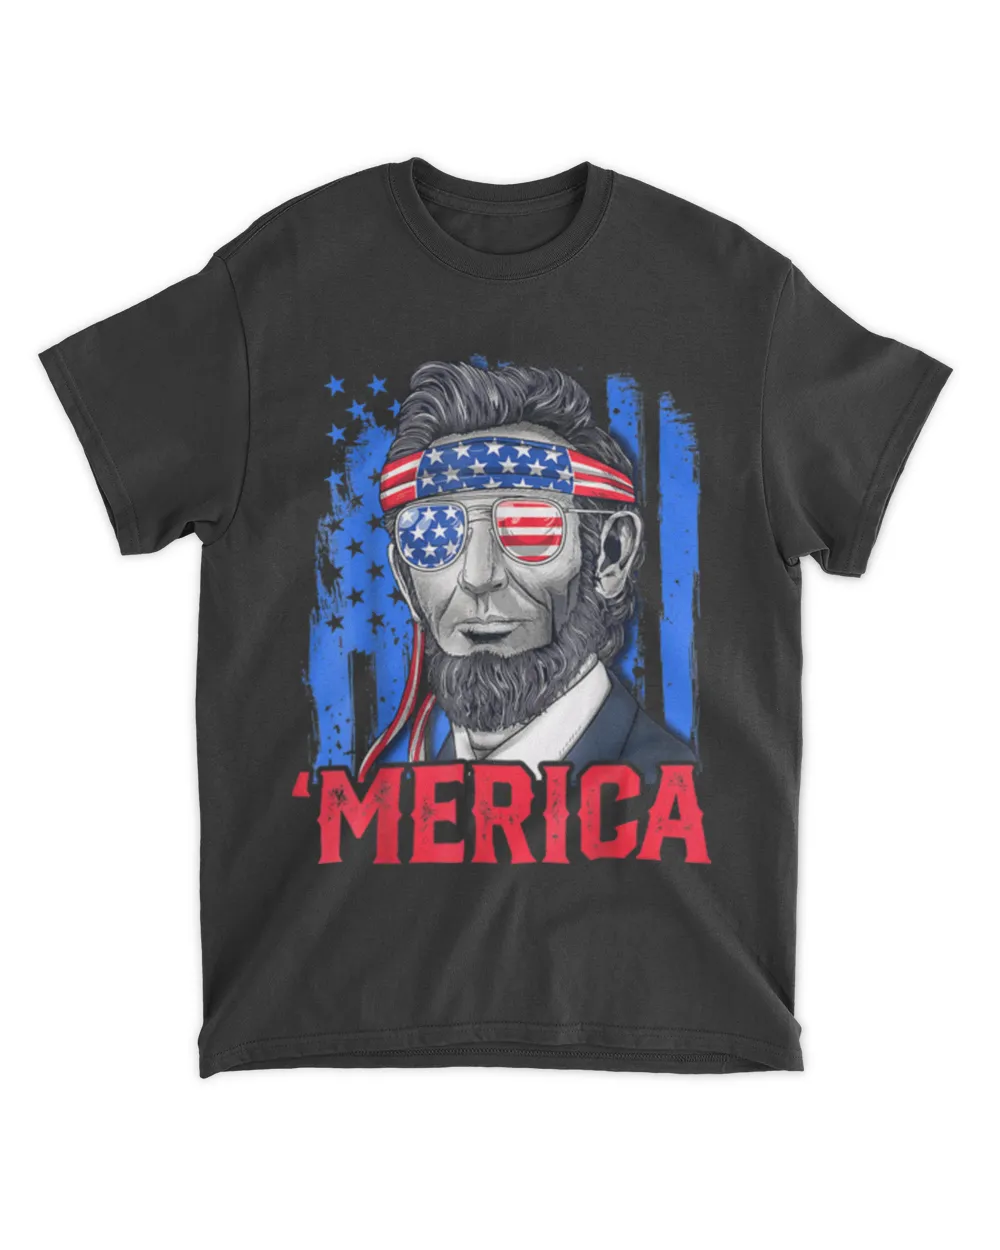 Abraham Lincoln Merica 4th of July American Flag T-Shirt tee